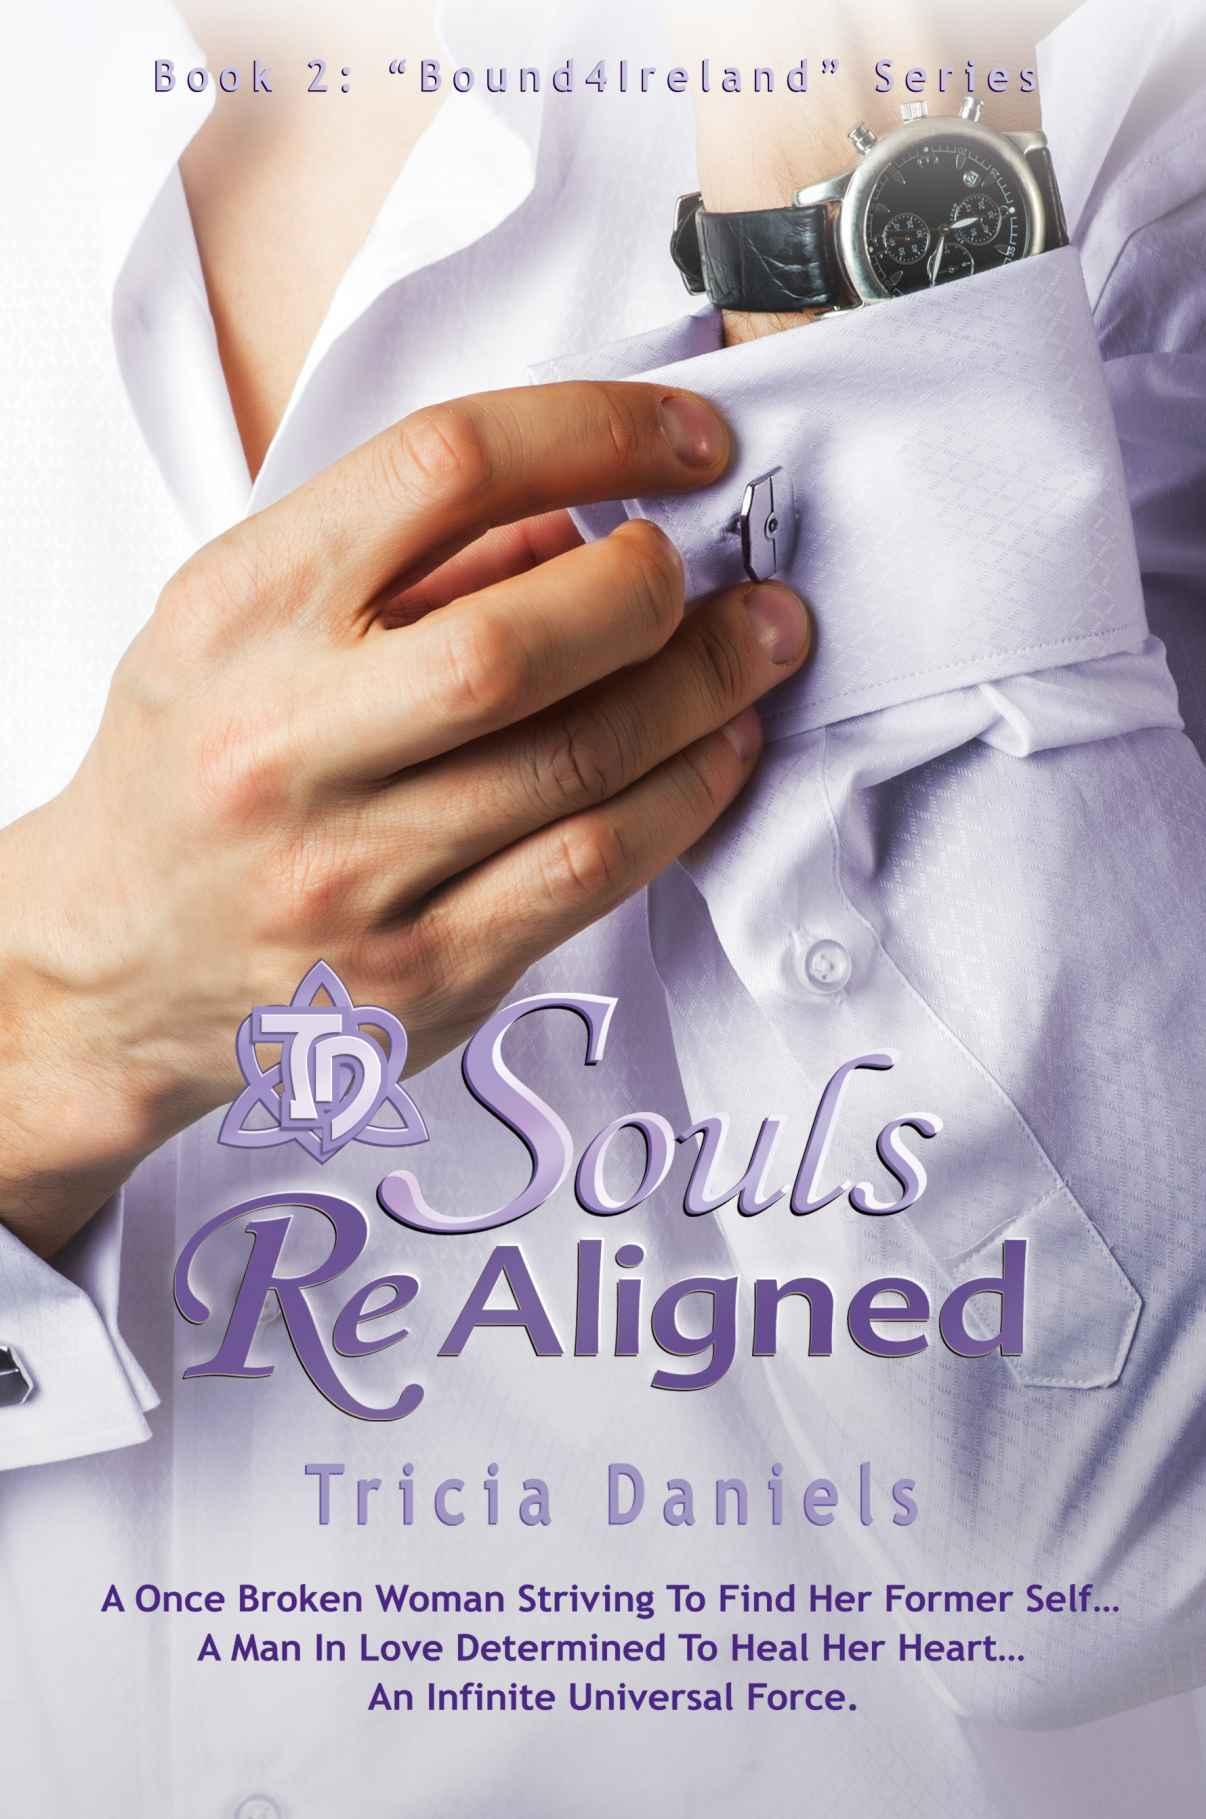 Souls ReAligned by Tricia Daniels